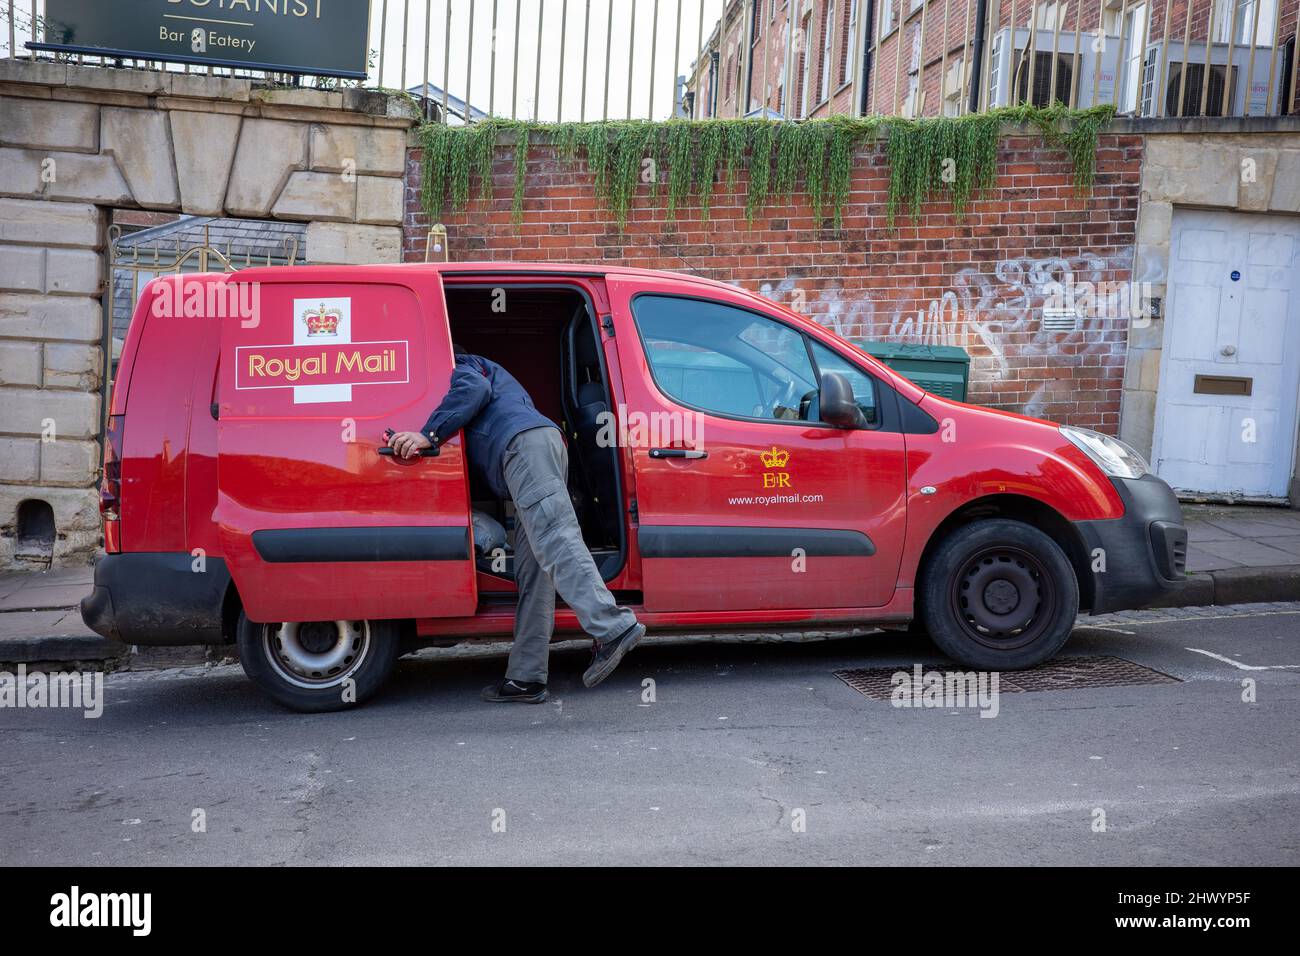 Royal Mail van and postman delivering (Mar 22) Stock Photo